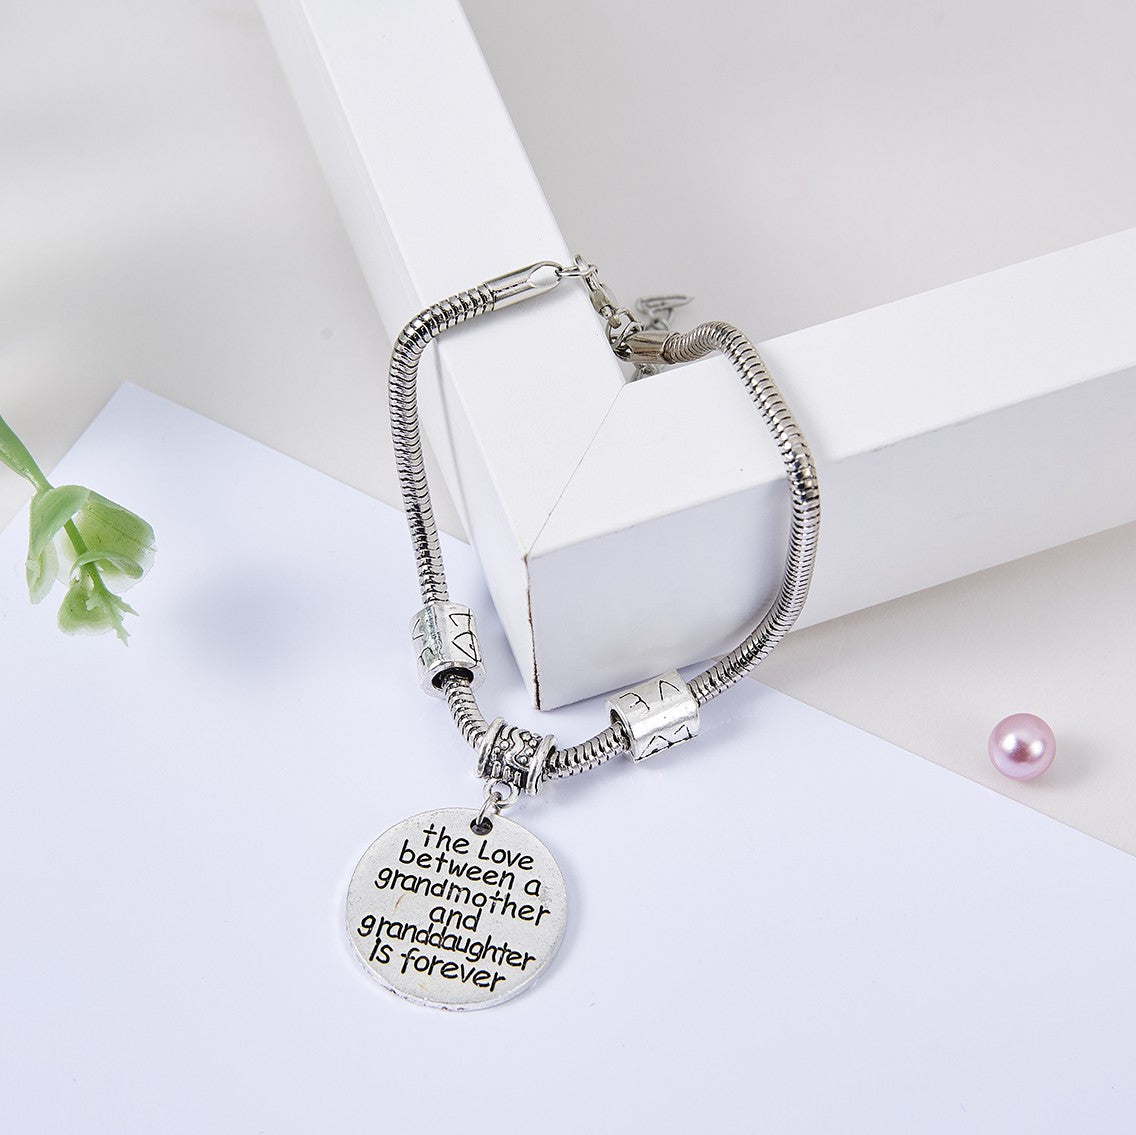 Grandma Bracelet from Granddaughter Grandma Jewelry Side by Side or Miles Apart We Are Connected by the Heart The Love Between a Grandmother and Granddaughter is Forever Grandma Christmas Gifts 